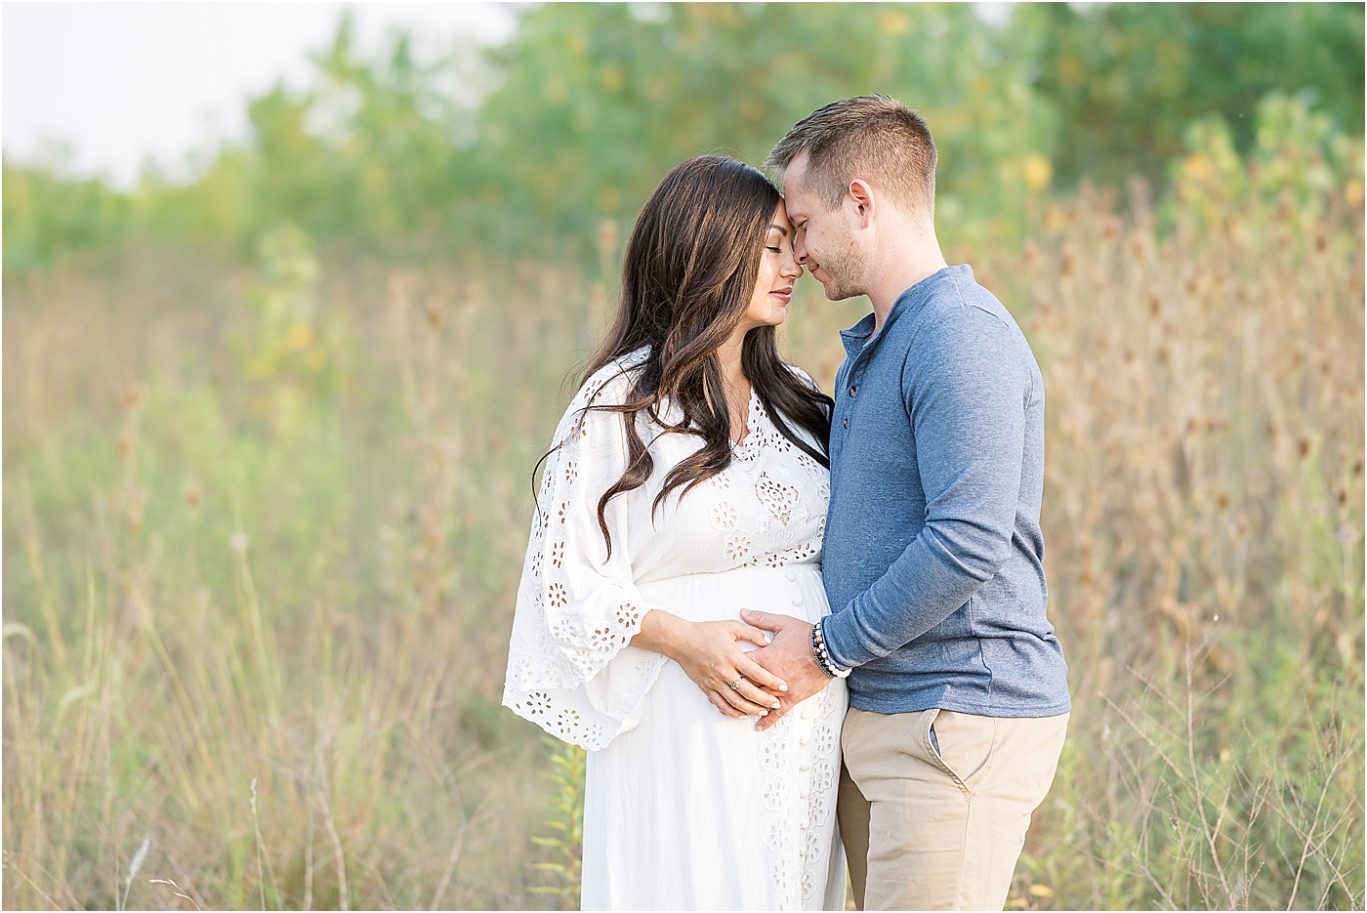 Maternity session for new parents at Flat Fork Creek Park in Fishers. Photo by Lindsay Konopa Photography.